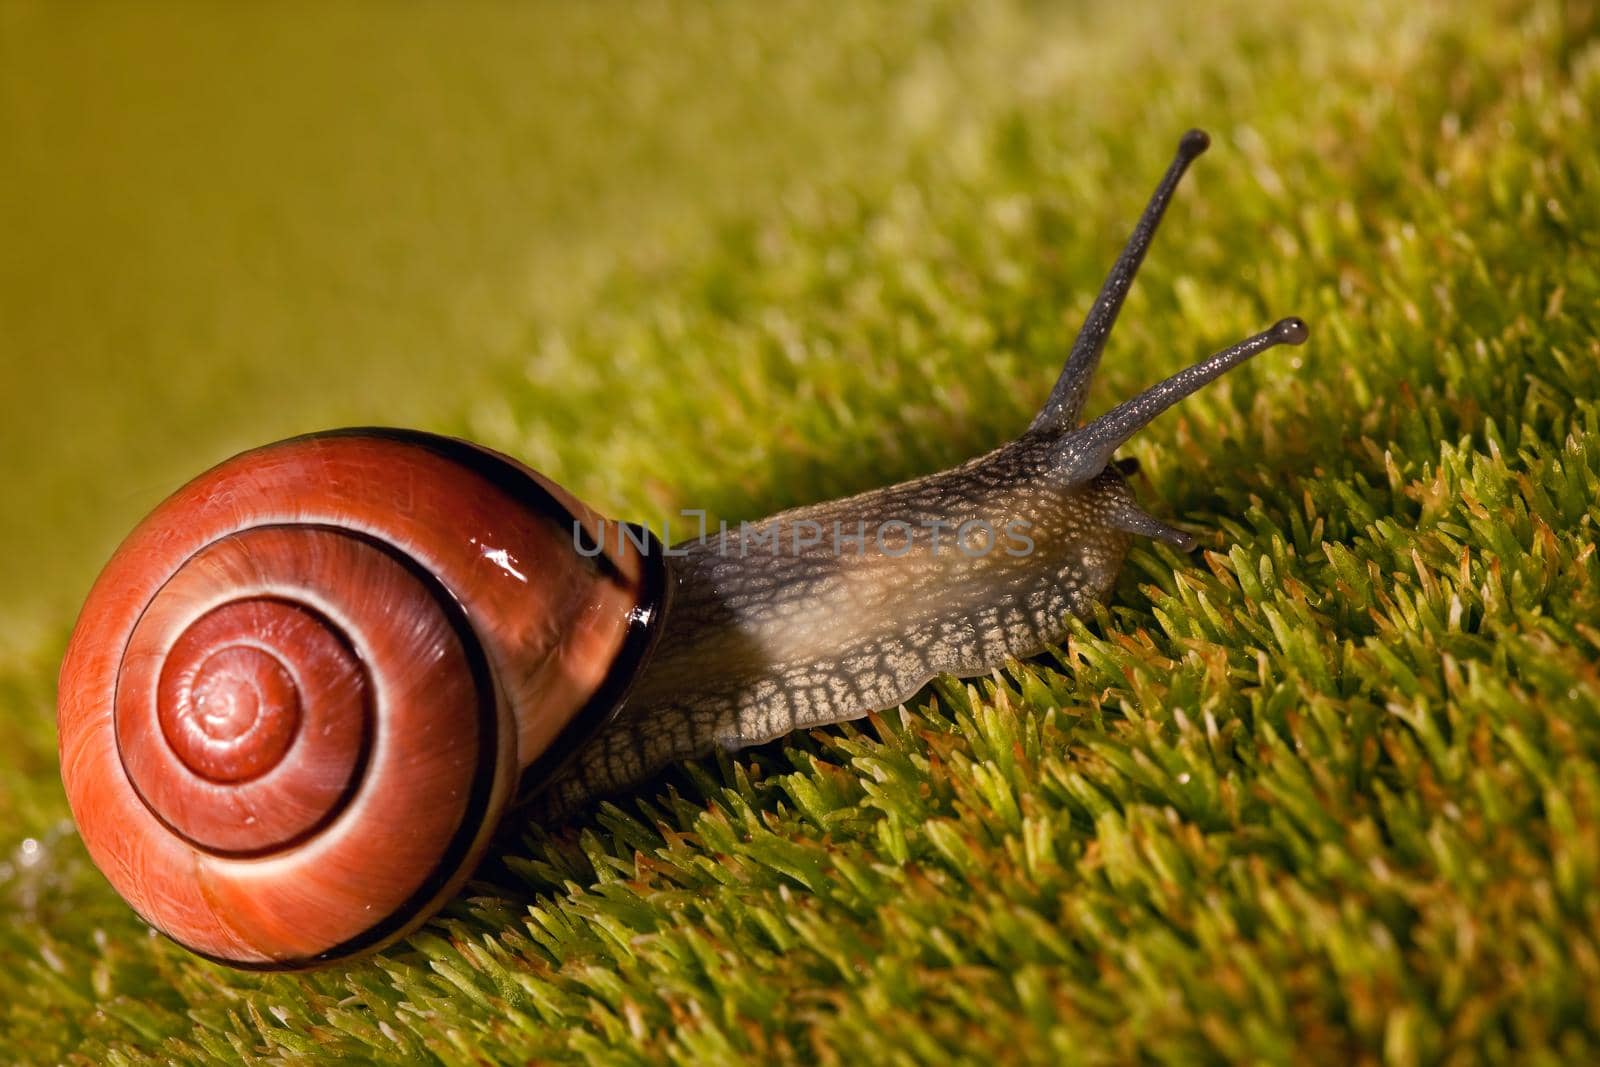 The nice snail with long antennas creeps on the surface of the moss